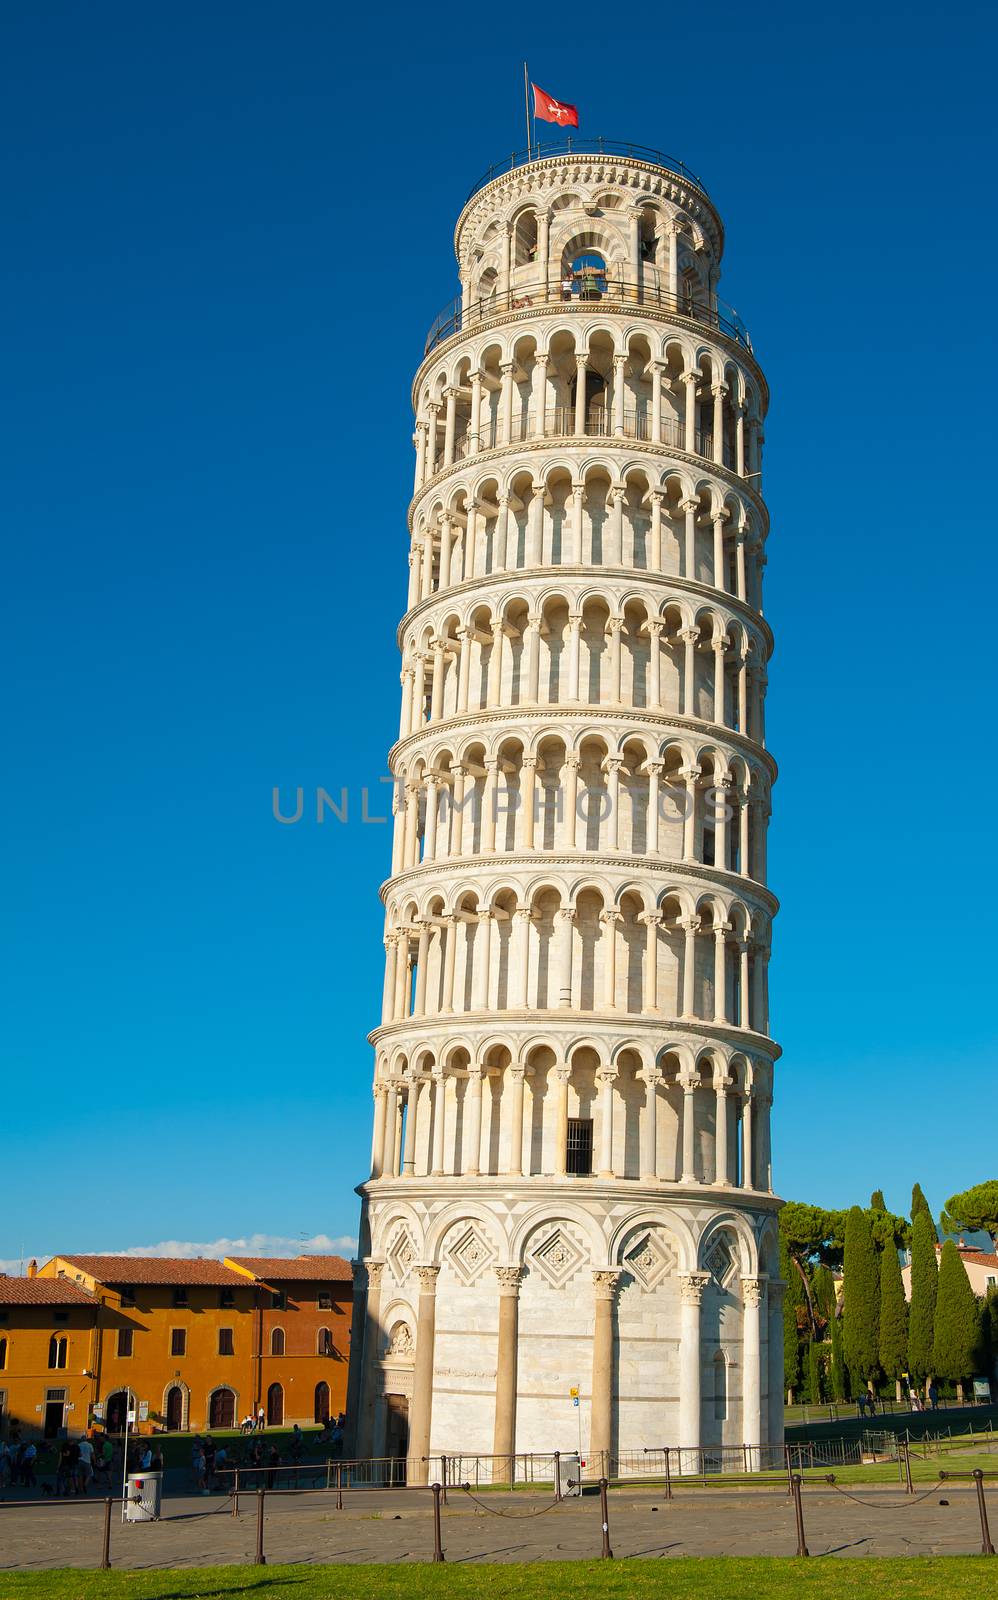 Famous leaning Tower of Pisa in Italy in a daytime